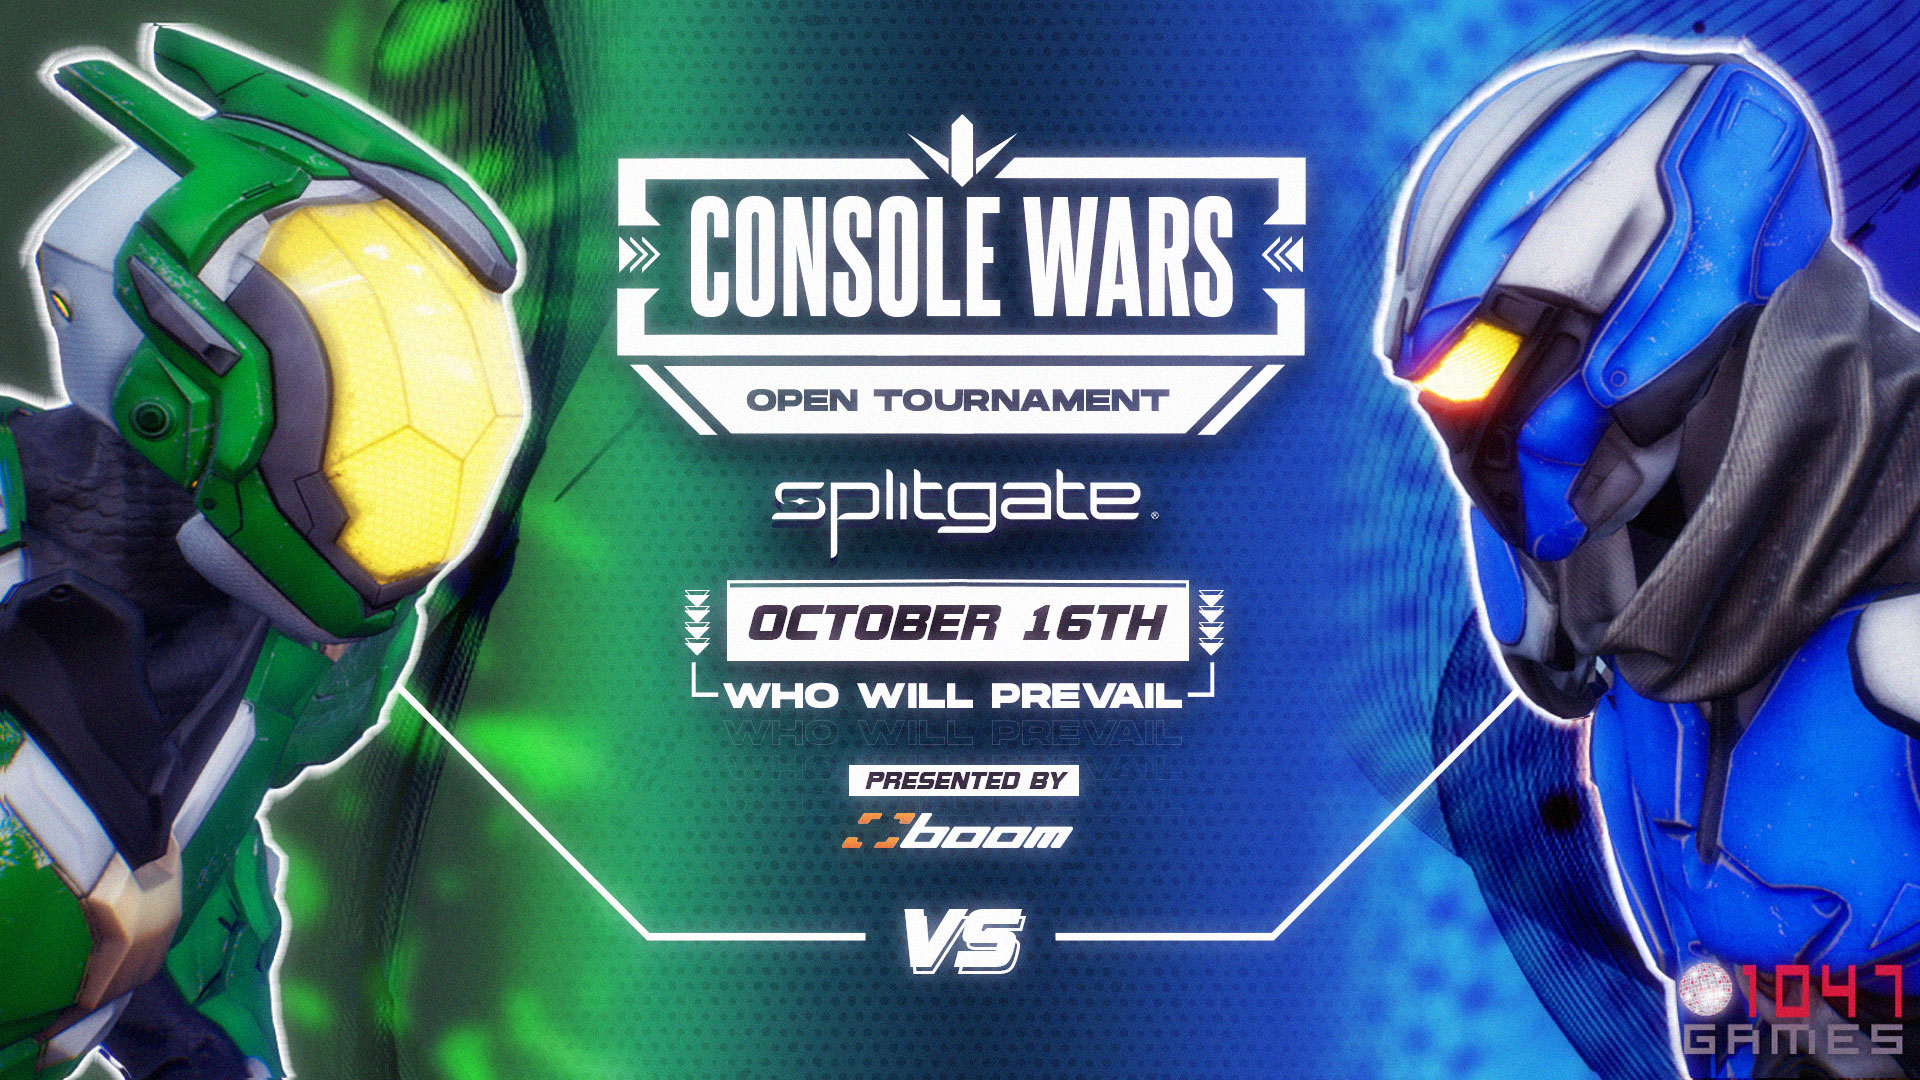 Last Chance to Join Splitgate Console Wars!